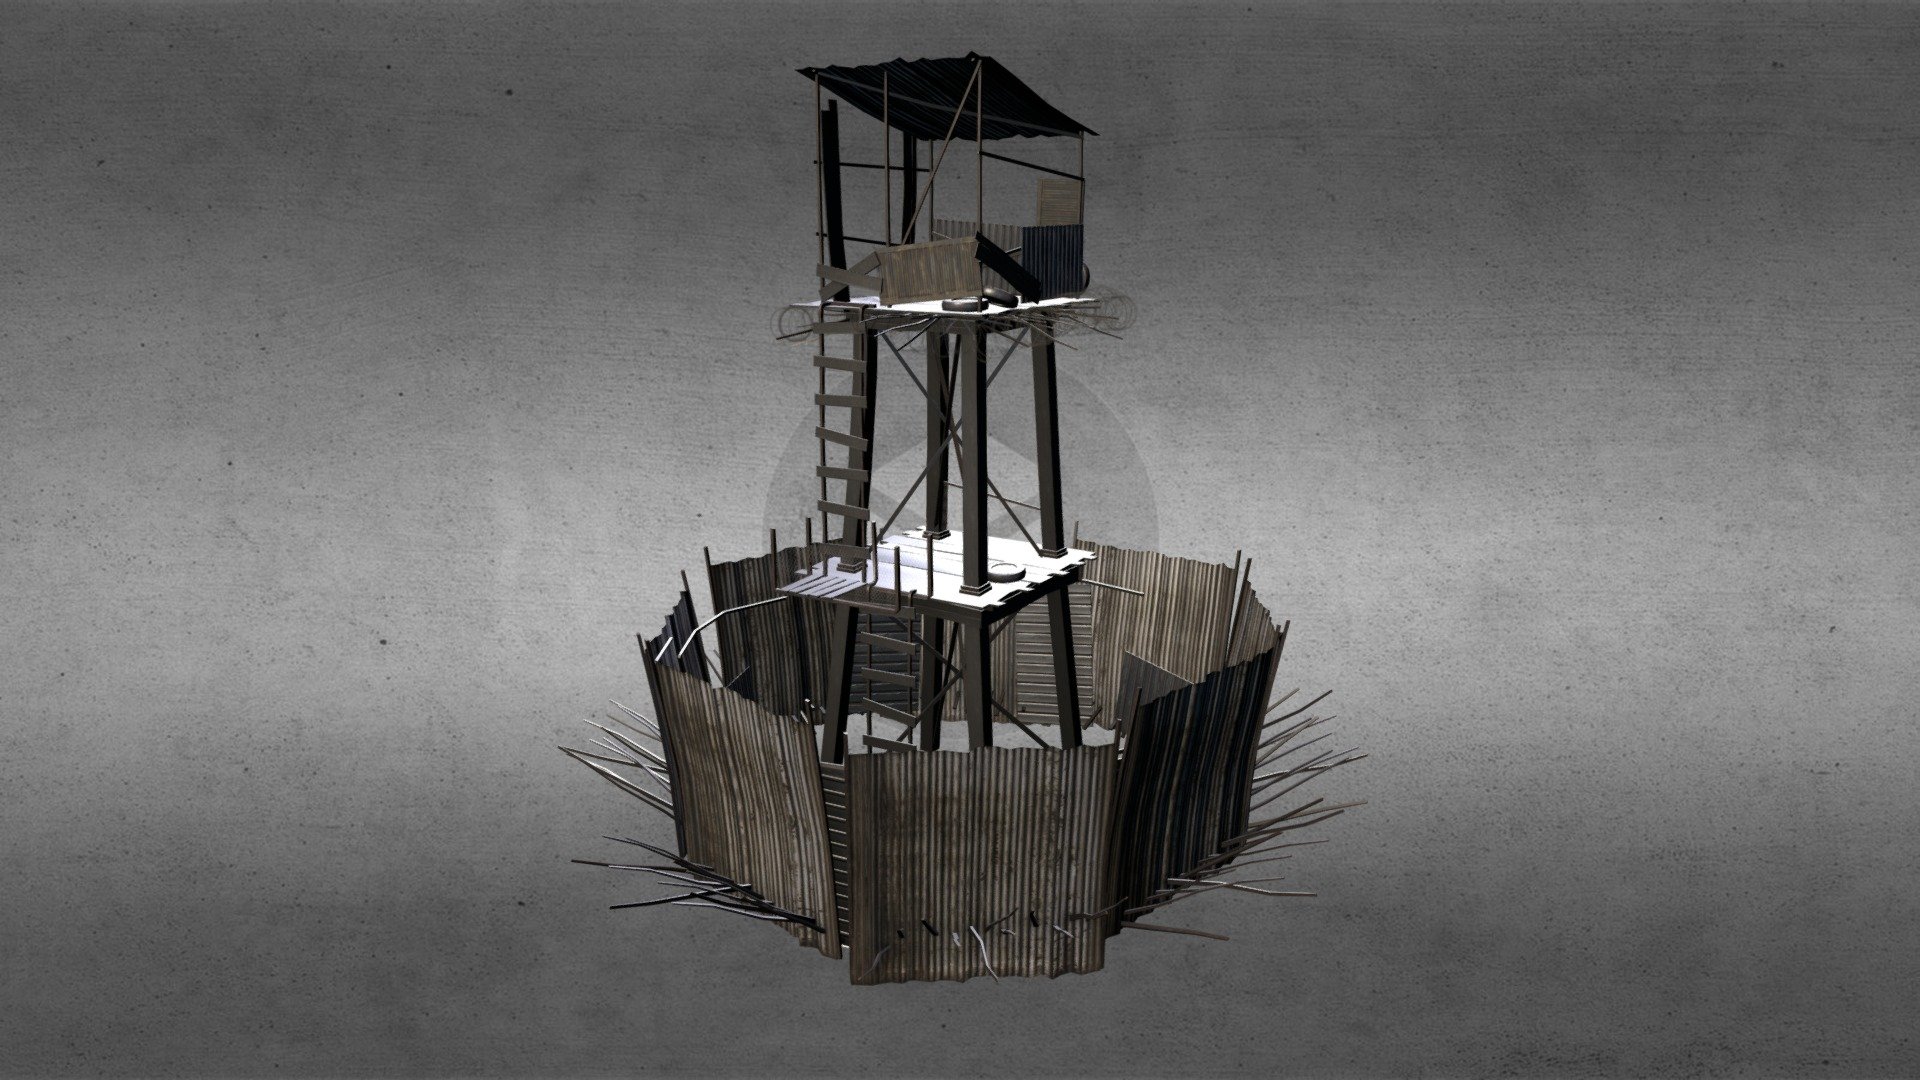 This tower was modelized using 3D Studio Max, in order to be an element for a little Post-Apocalyptic Tower Defense Game 3d model